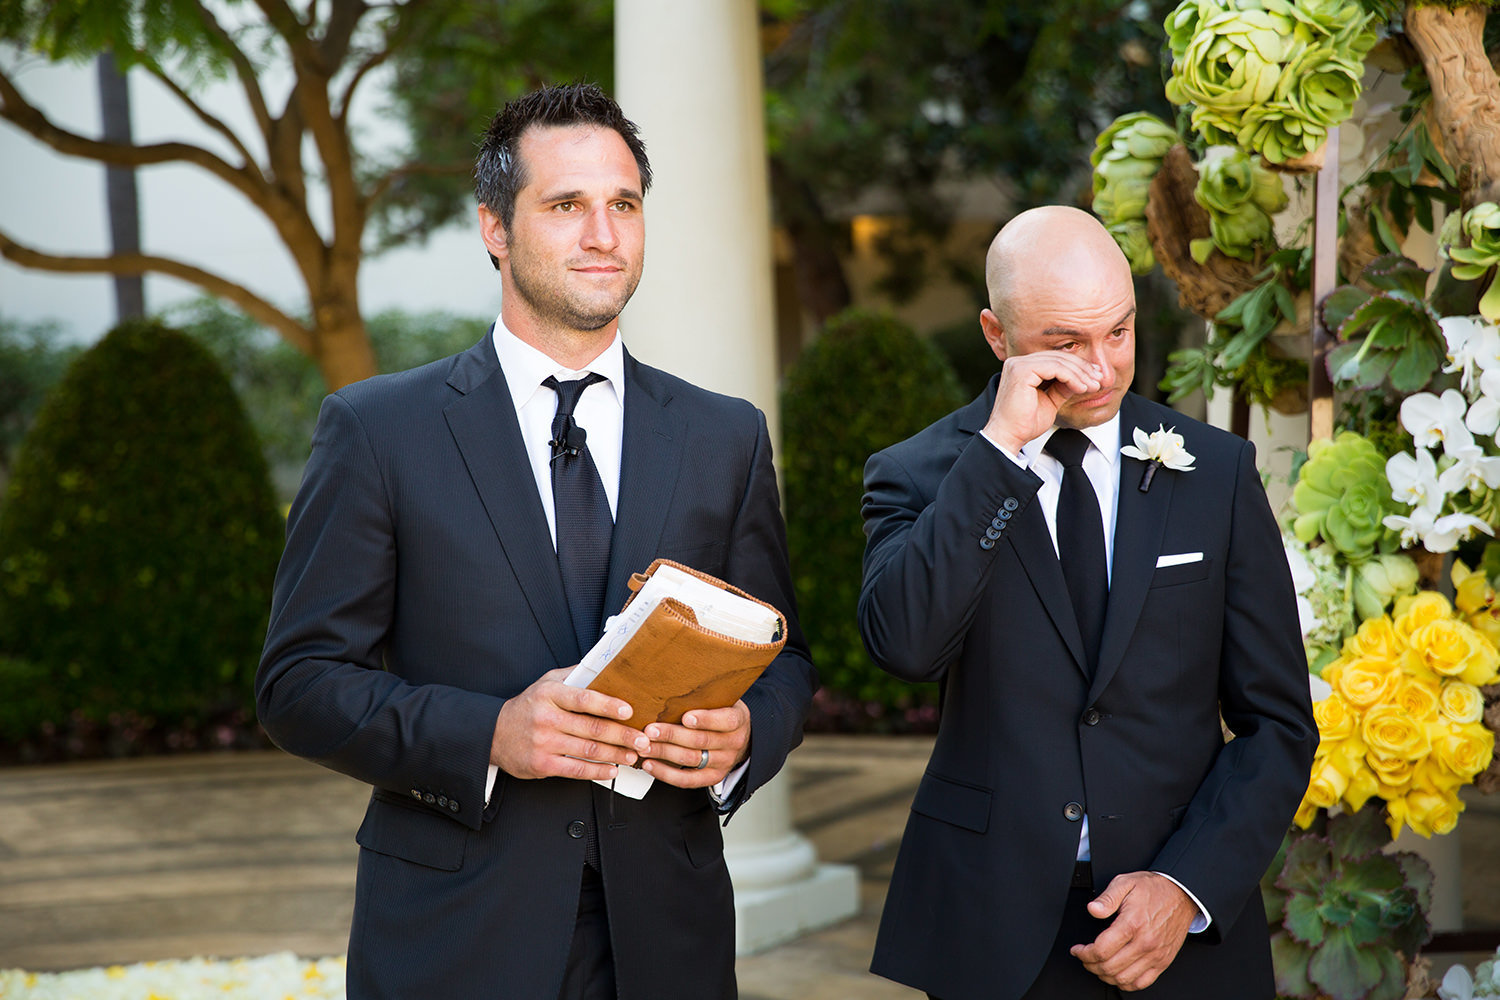 The groom's emotions begin to show when he sees his bride for the first time